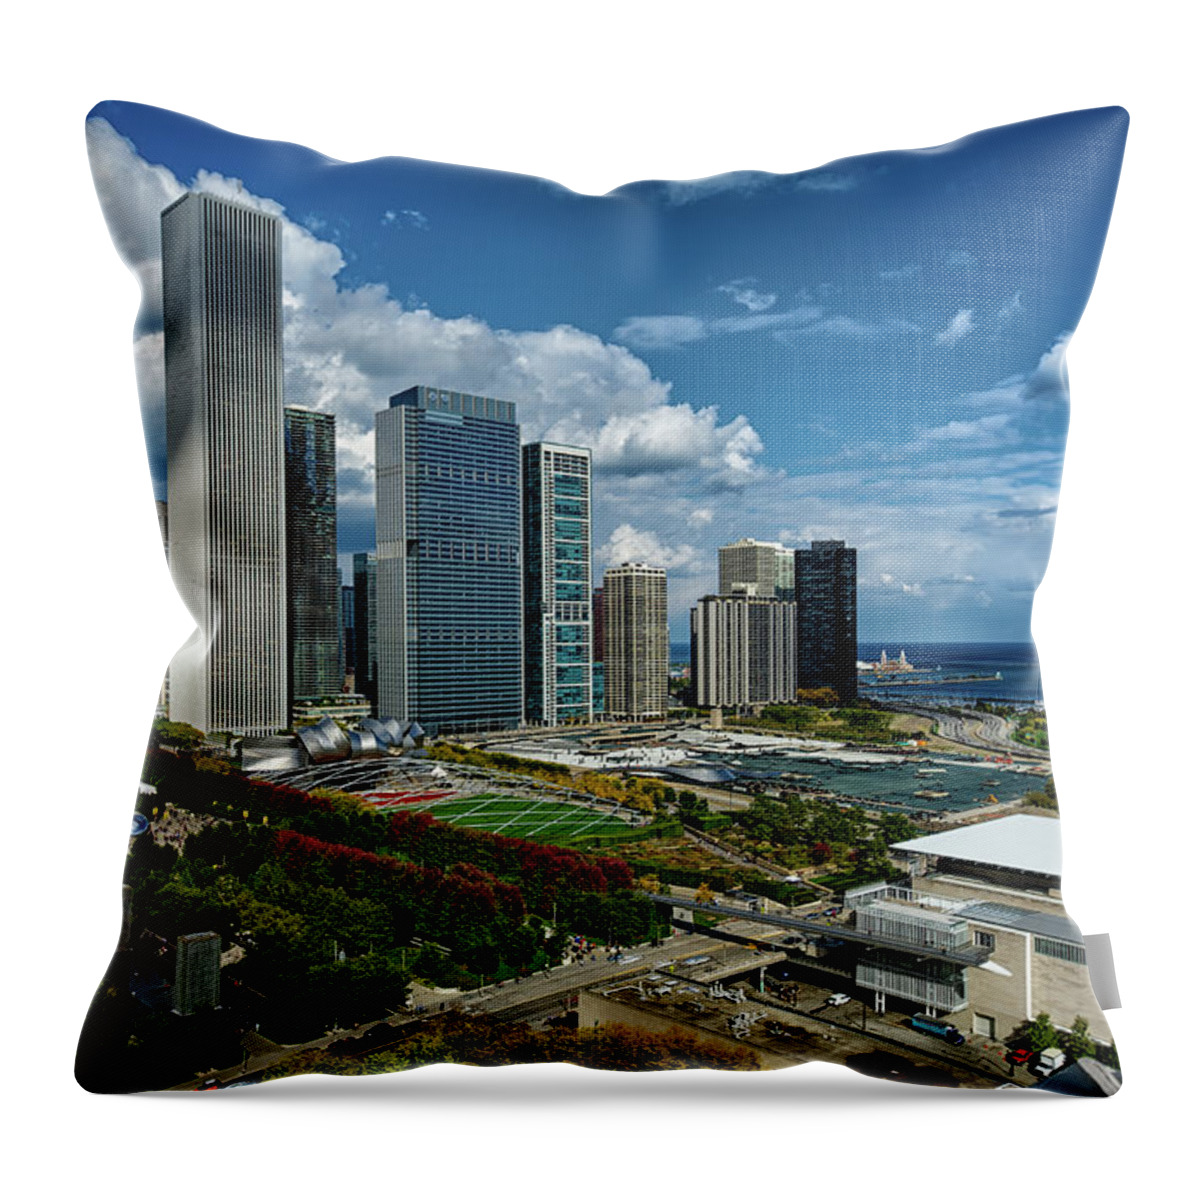 Tranquility Throw Pillow featuring the photograph Chicago Skyline by Milosh Kosanovich - Precision Digital Photography